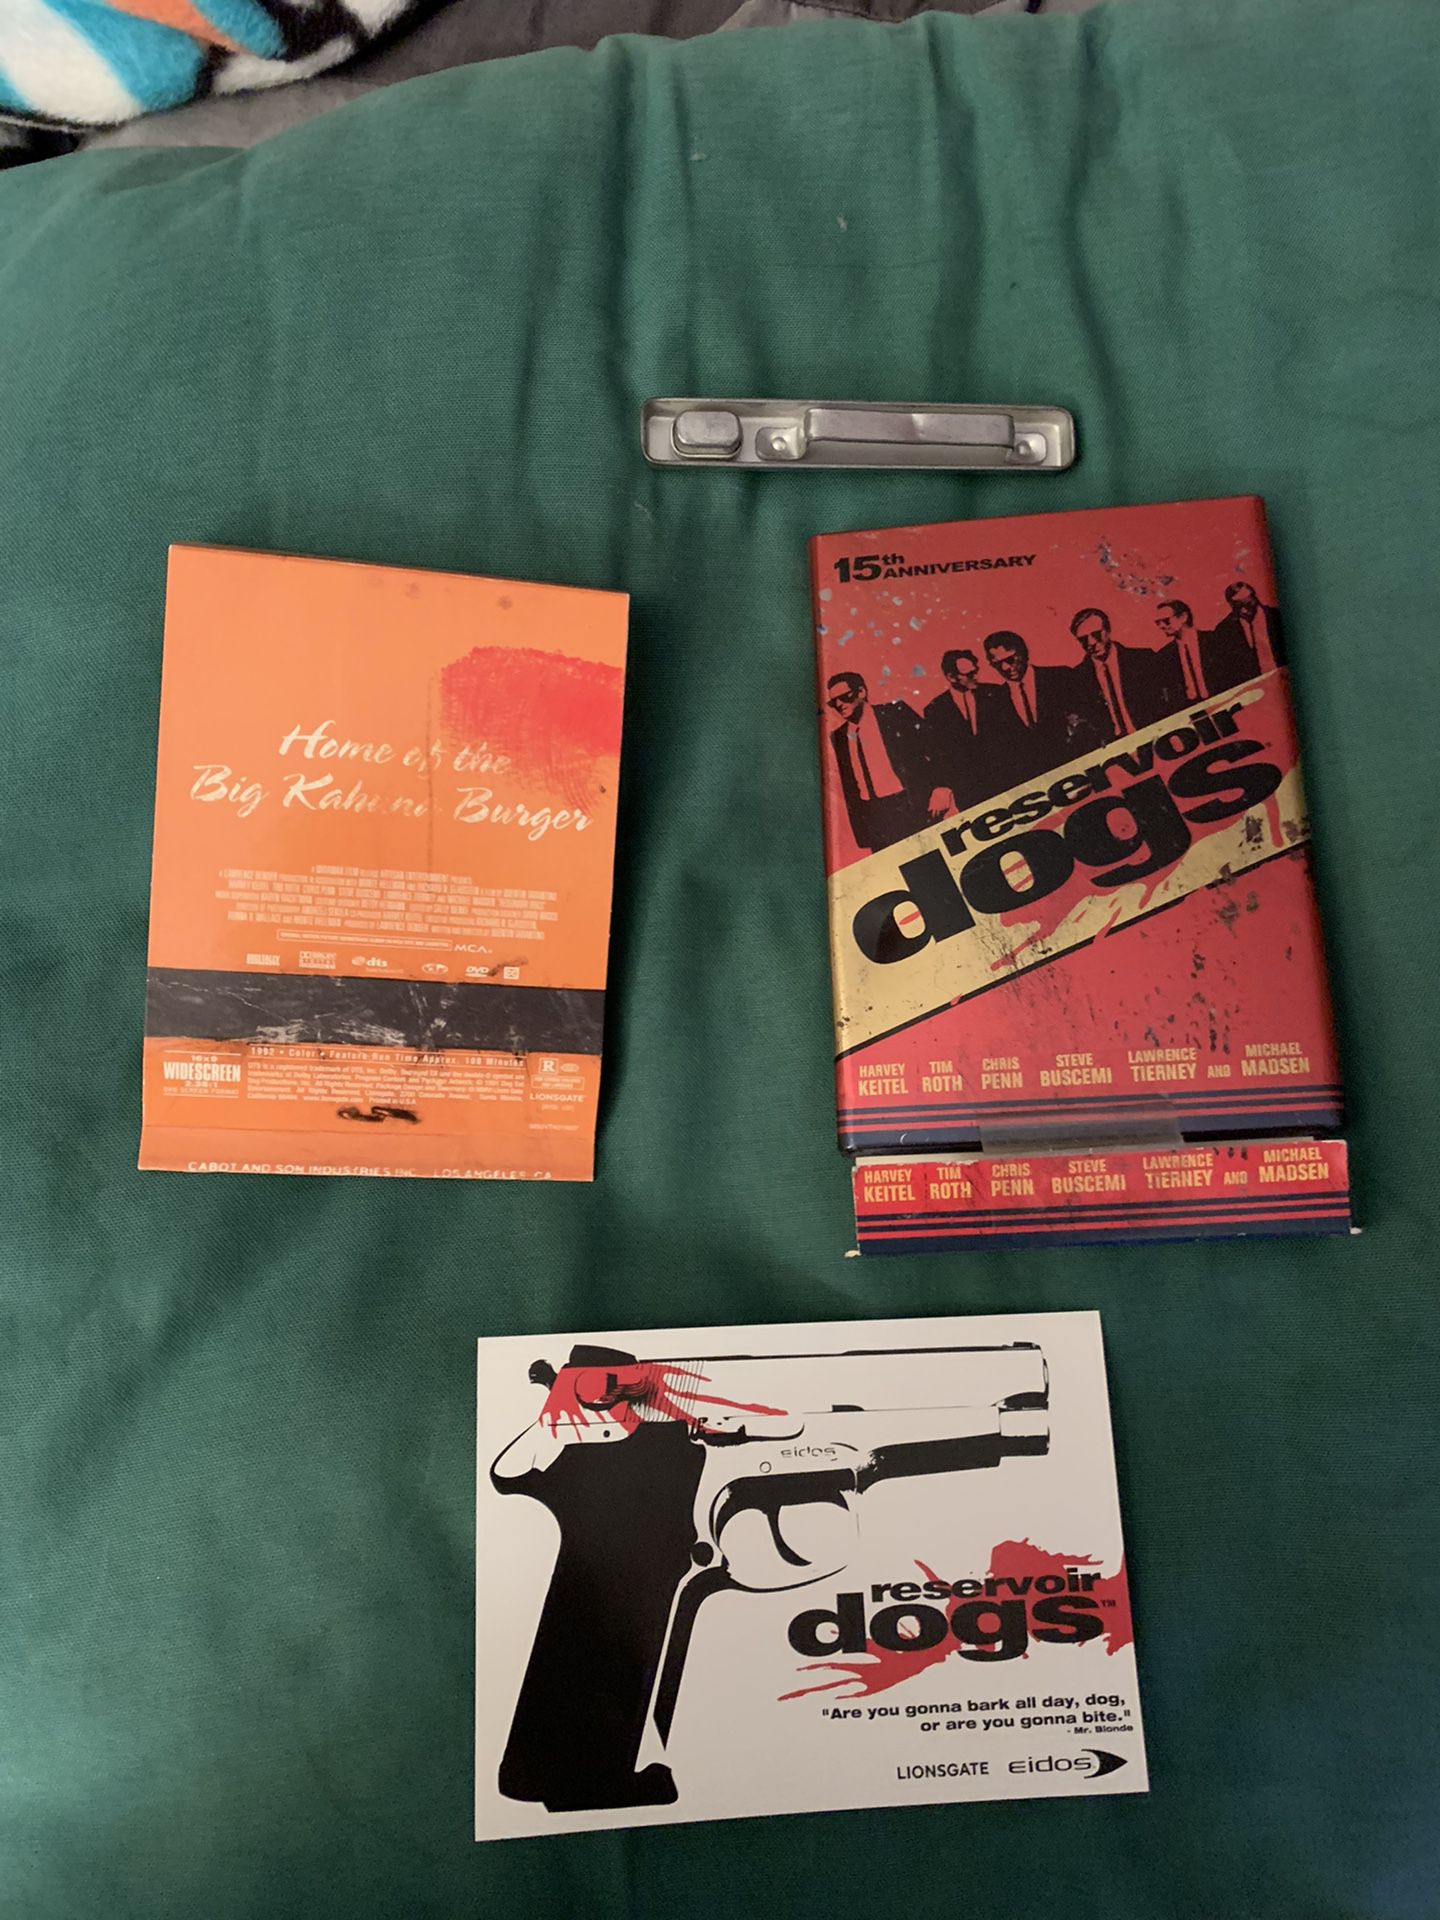 15th Anniversary Special Edition of Cult Classic “The Reservoir Dogs”